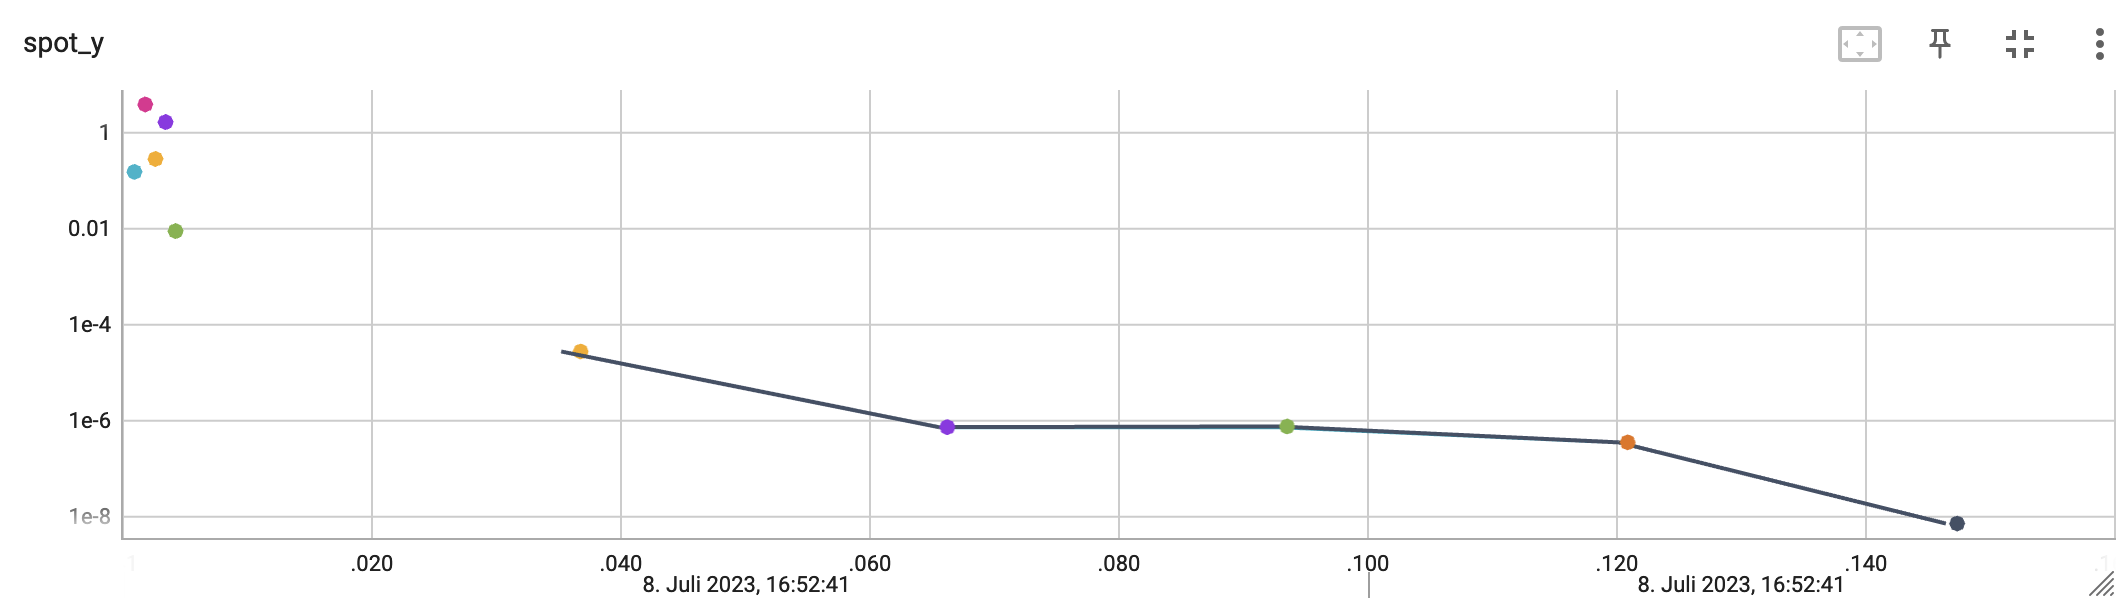 TensorBoard visualization of the spotPython process. Objective function values plotted against wall time.